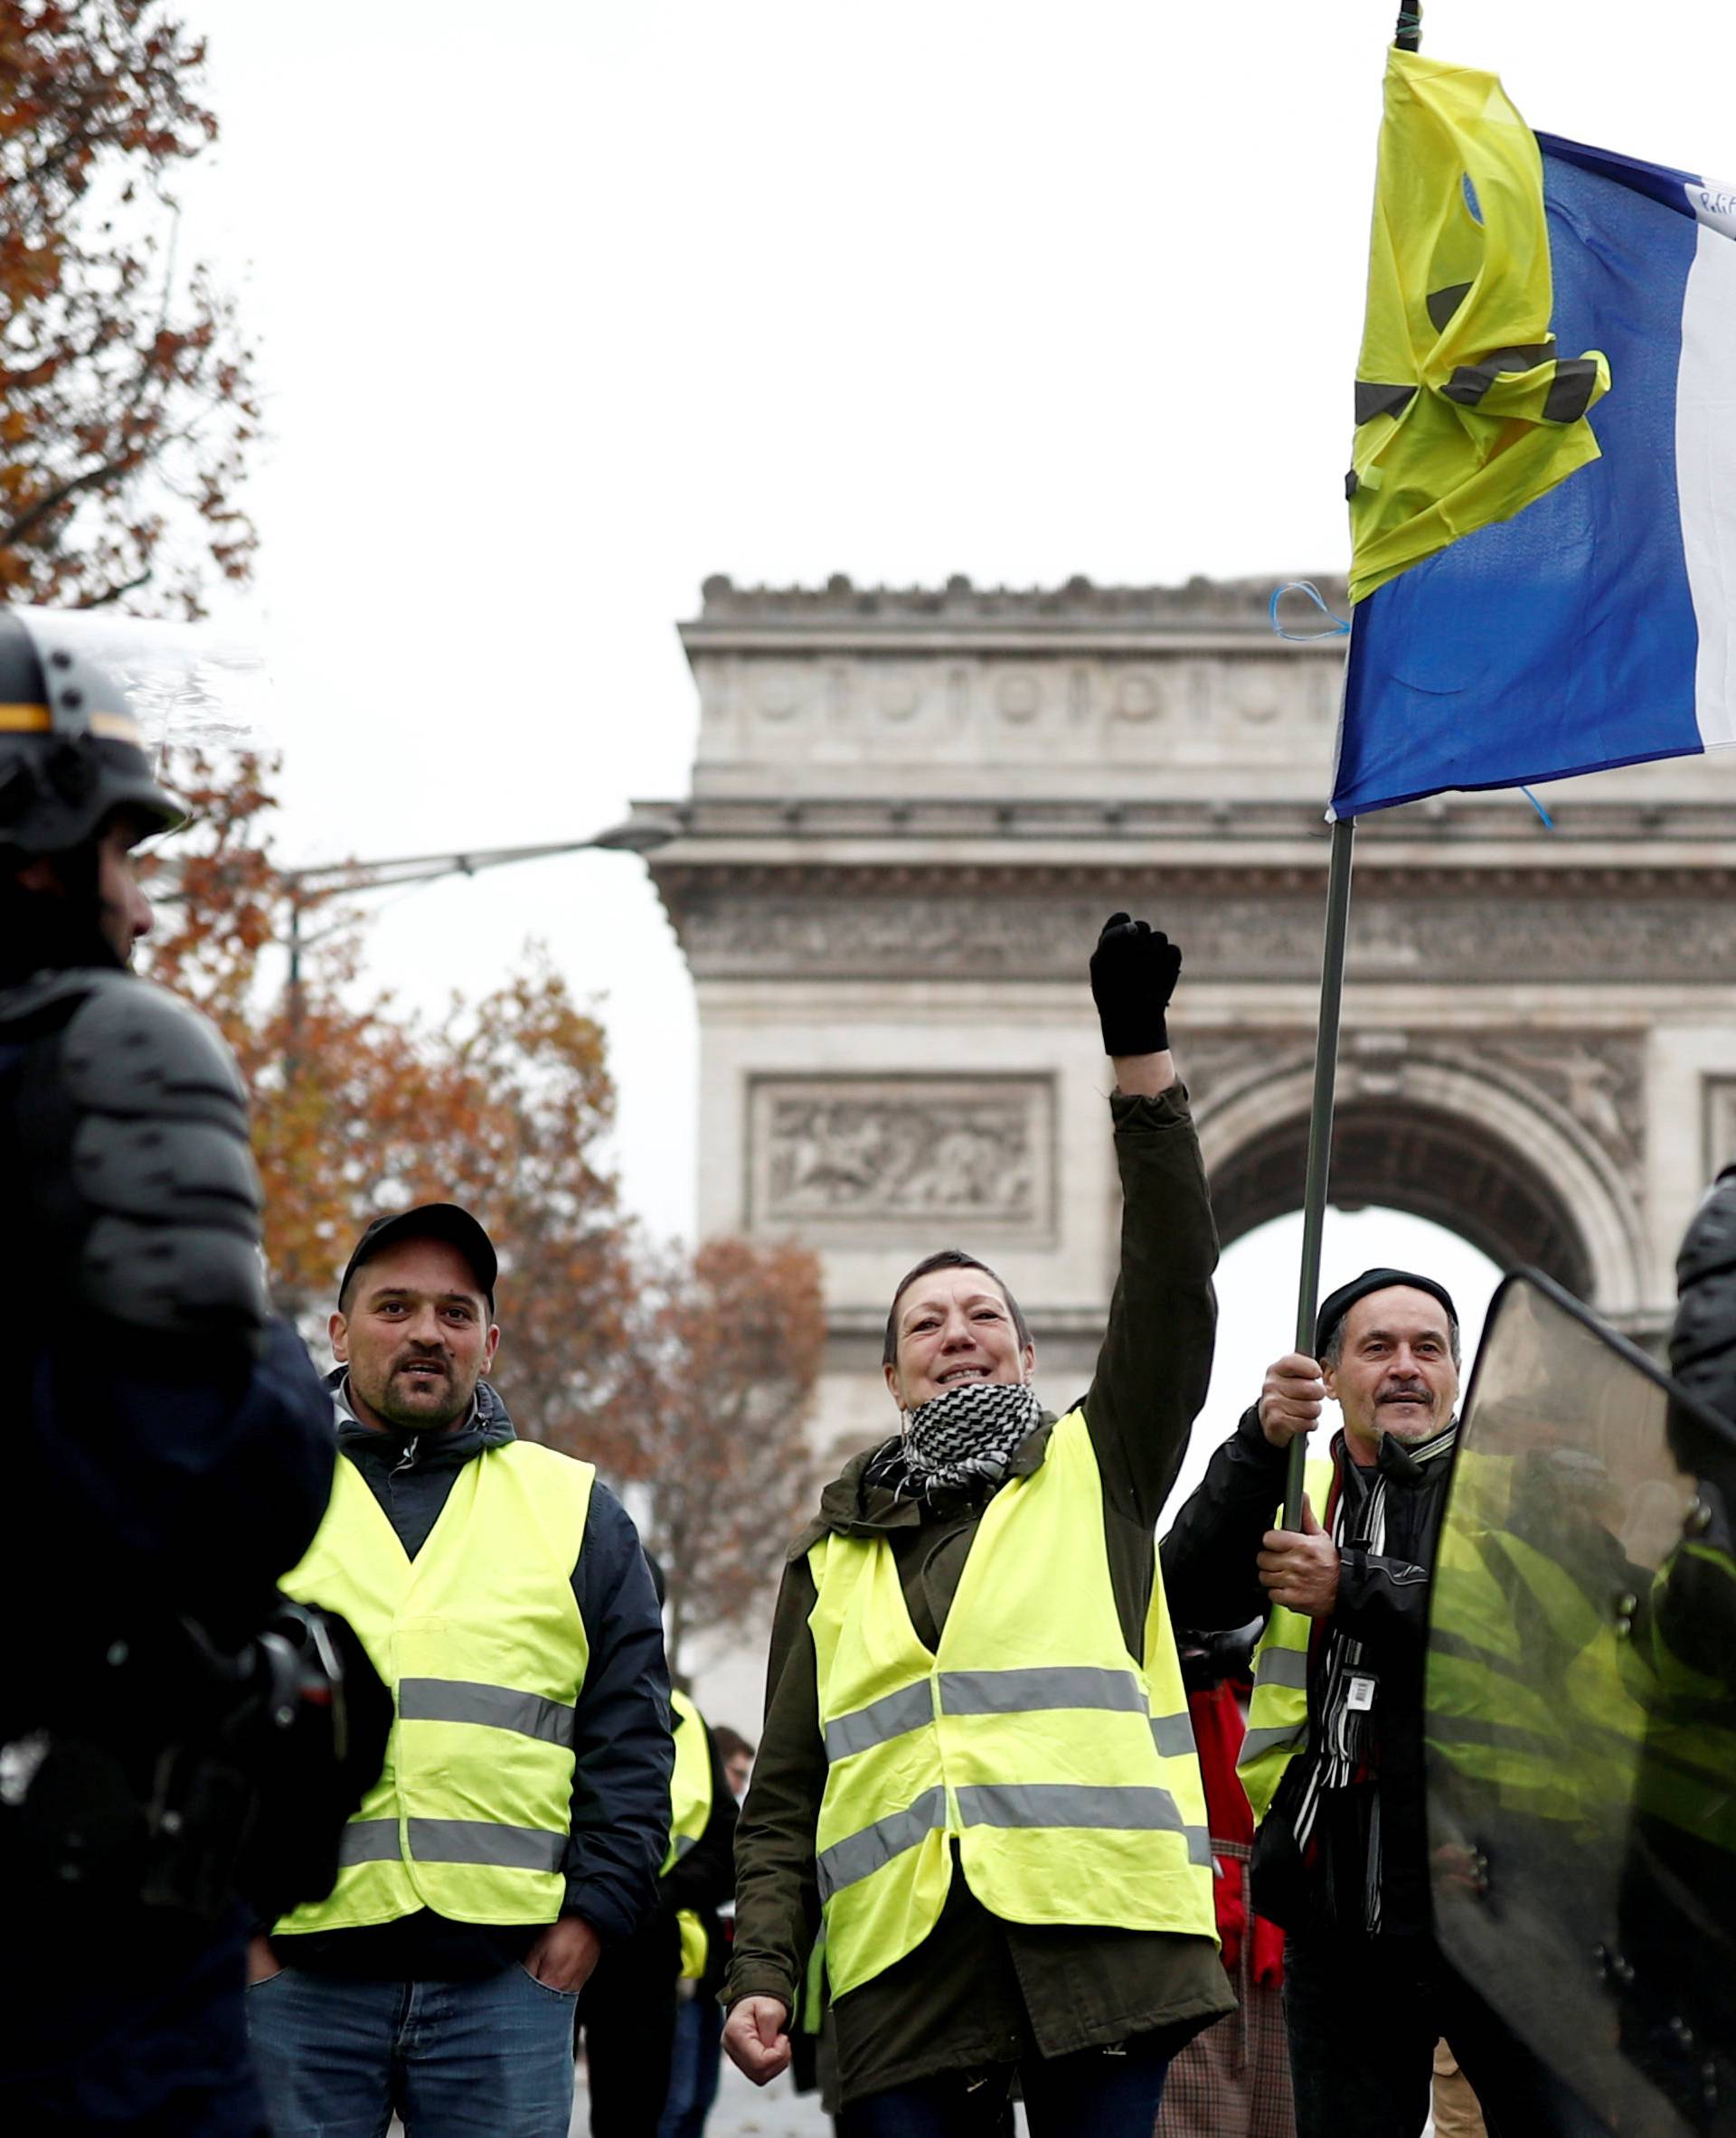 Protesters wearing yellow vests, a symbol of a French drivers' shout out slogans during protest against higher fuel prices, block the street in Paris